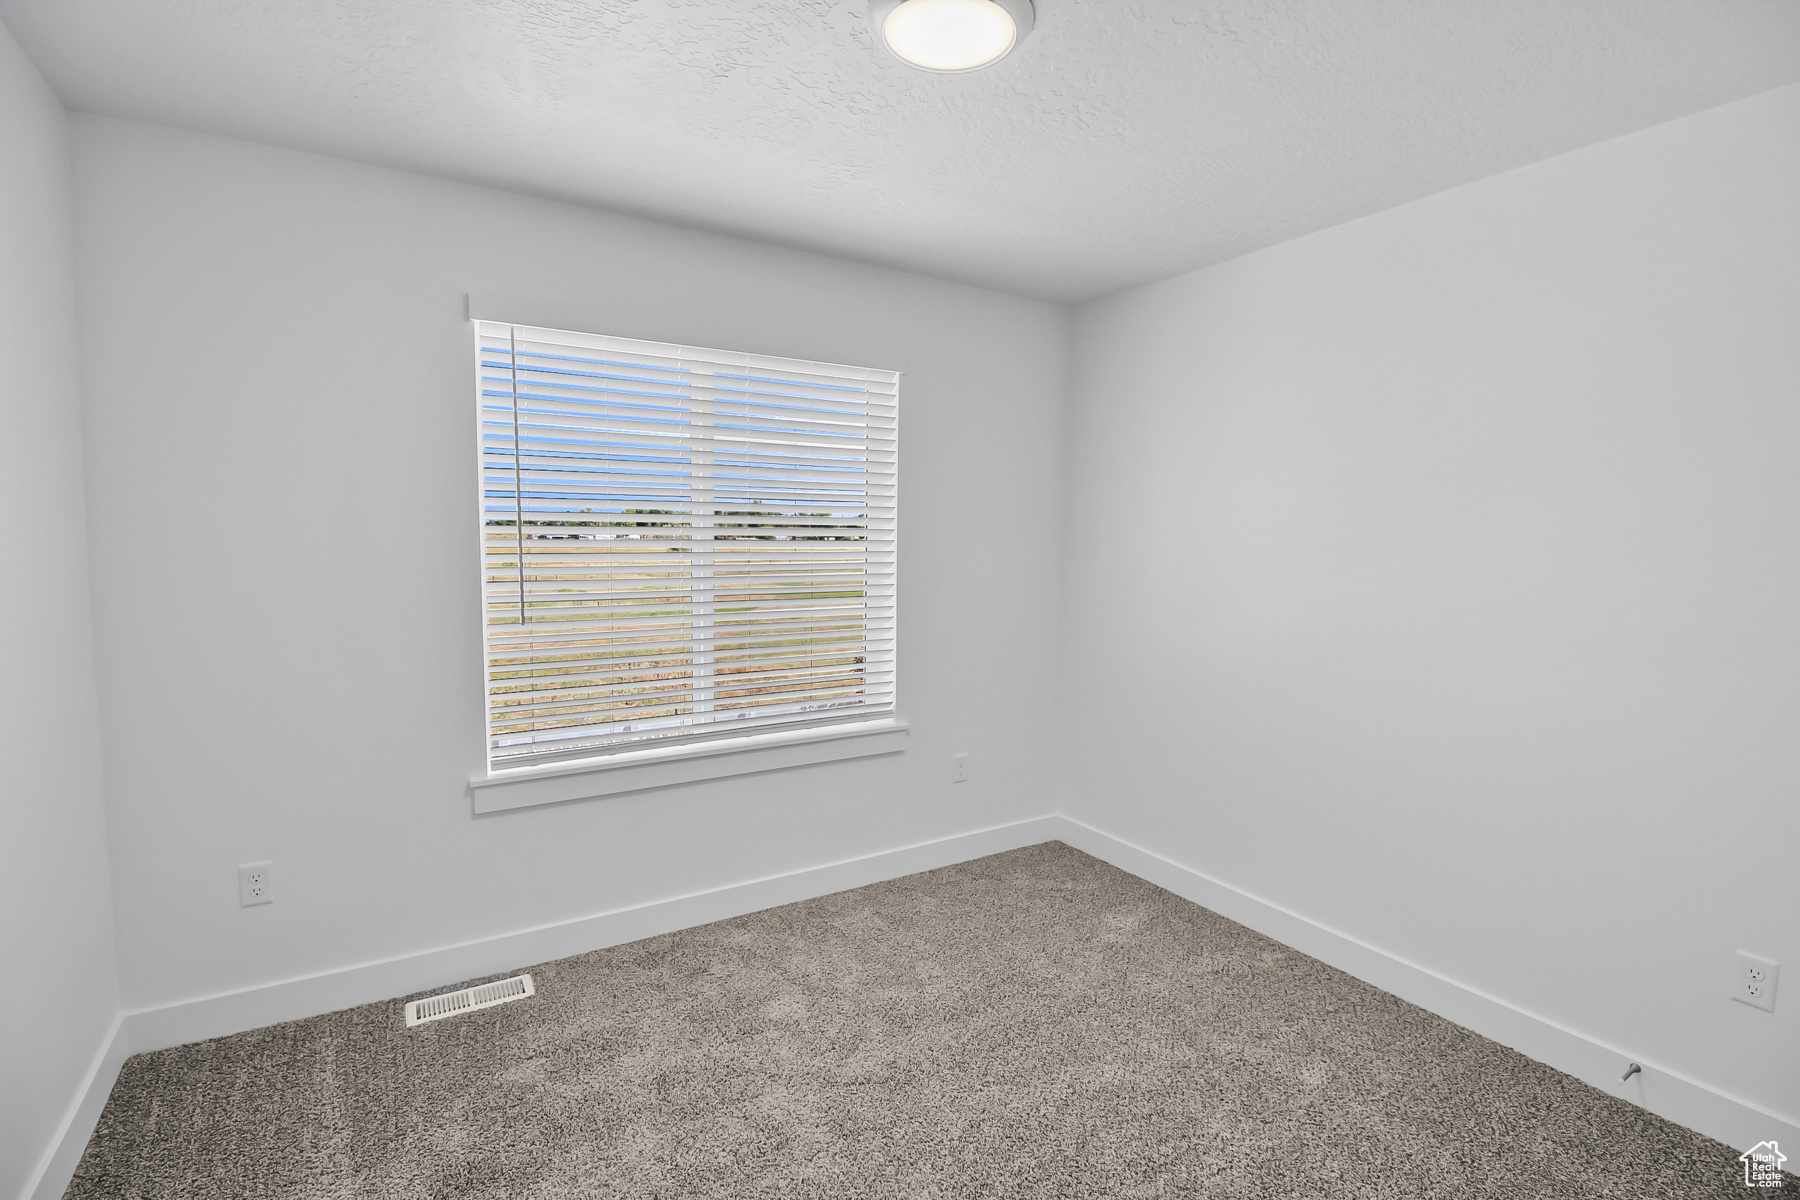 Photos are of a previous townhome.  Actual finishes will be similar but may vary.